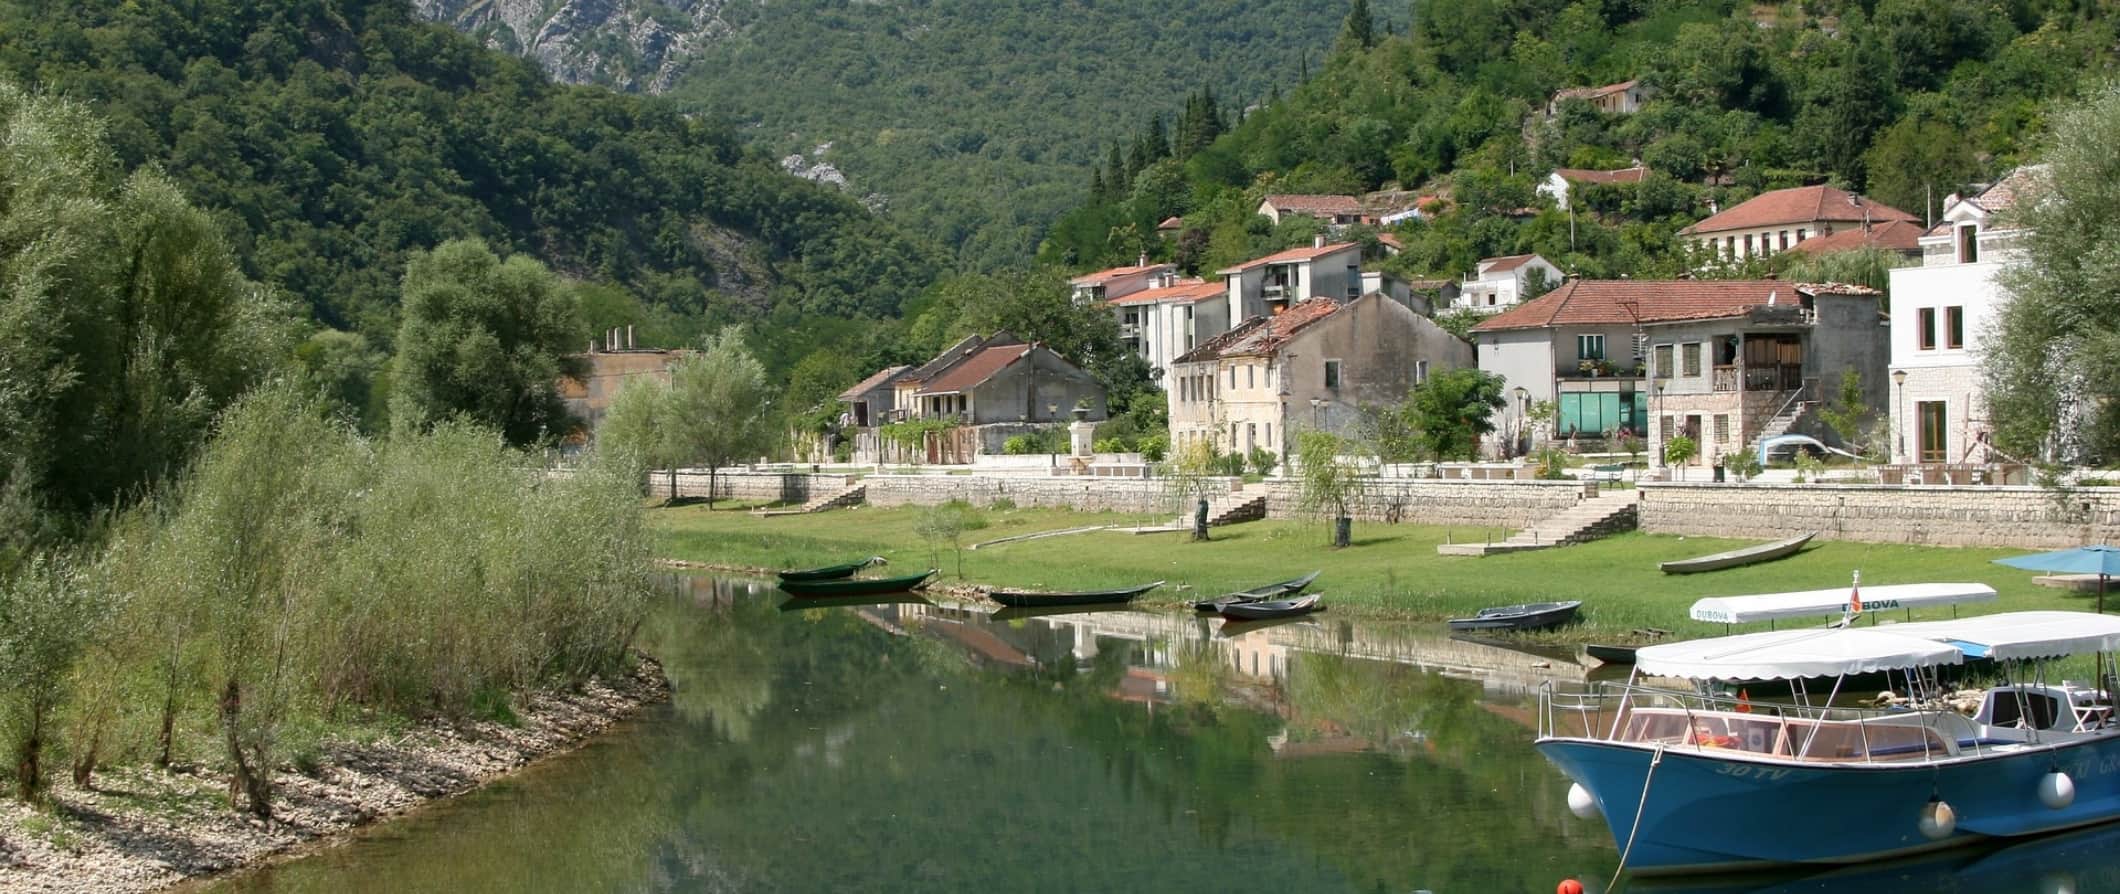 A small village surrounded by trees on the banks of a river in Montenegro